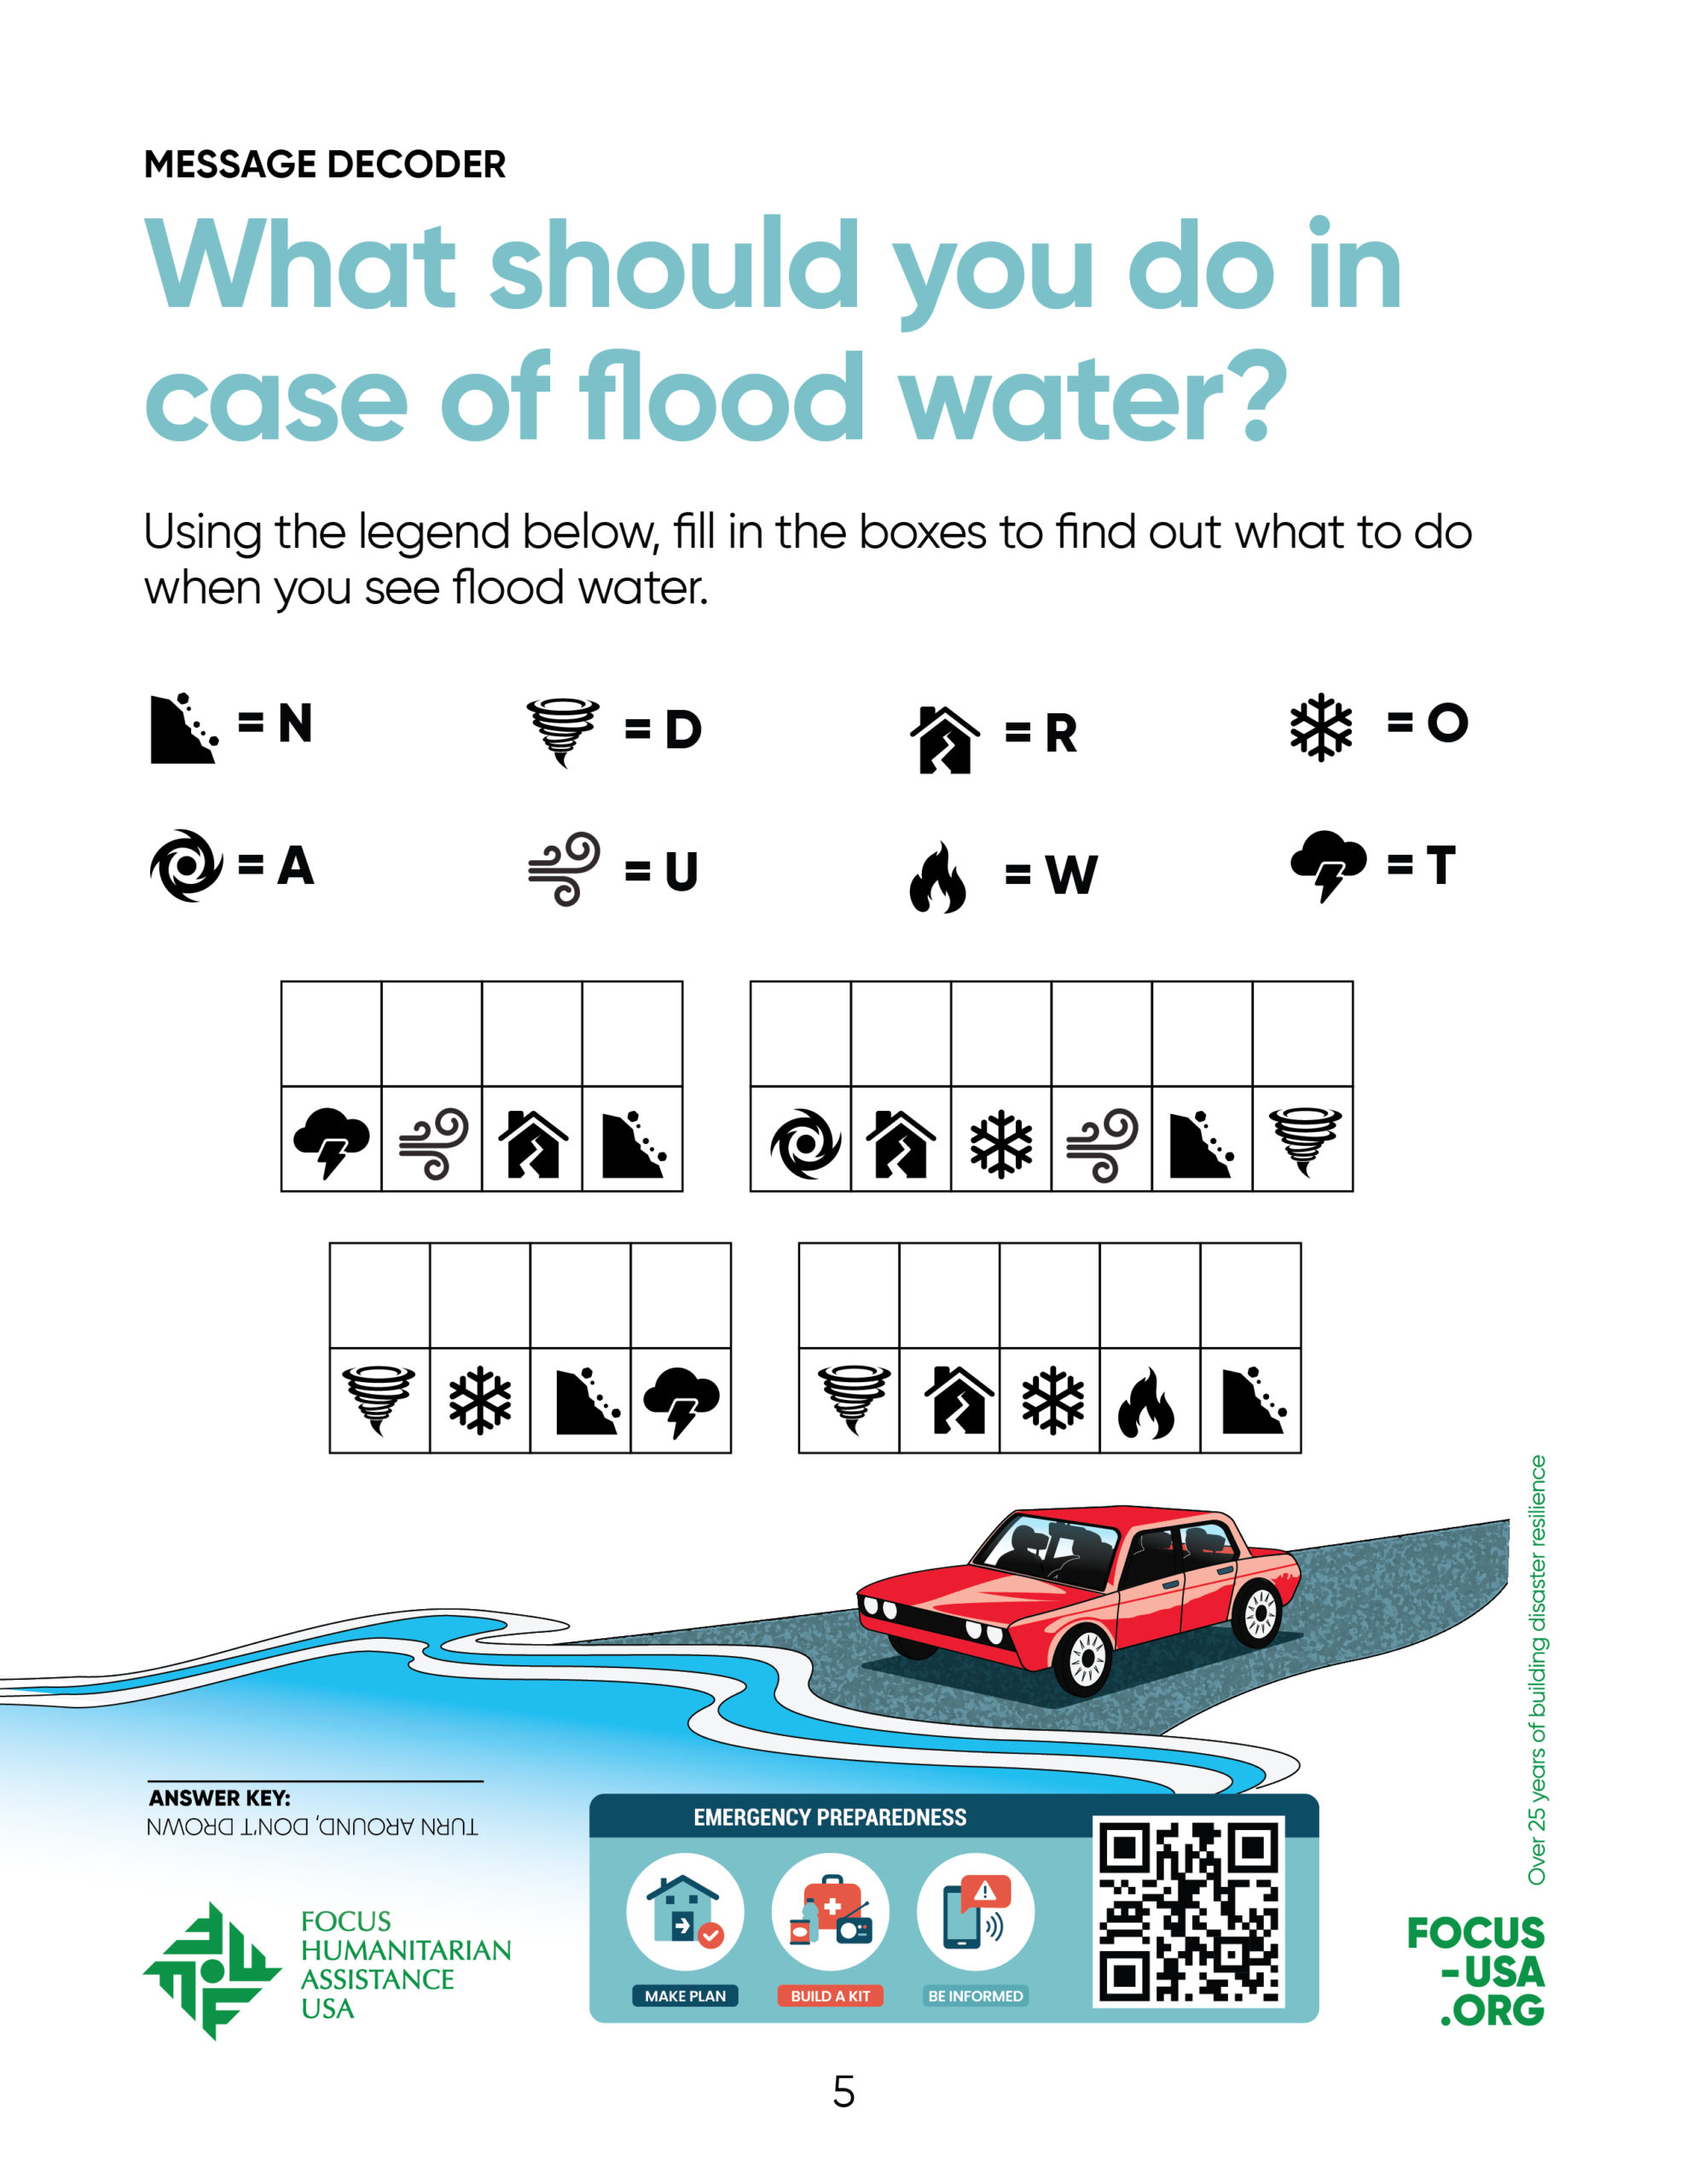 What should you do in case of flood water?